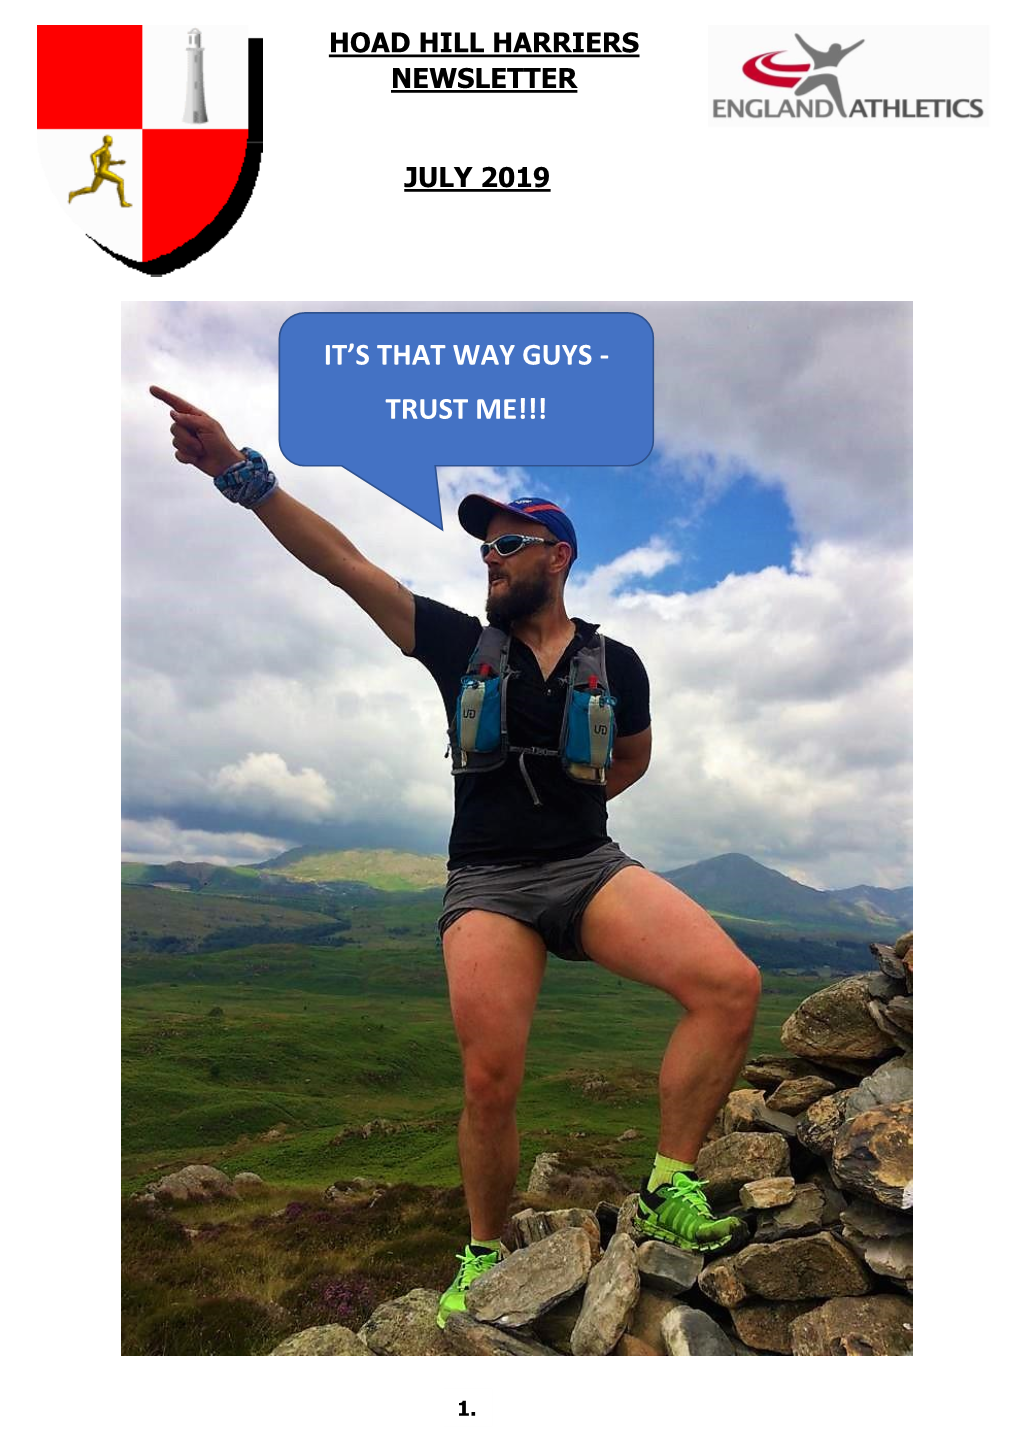 Hoad Hill Harriers Newsletter July 2019 It's That Way Guys